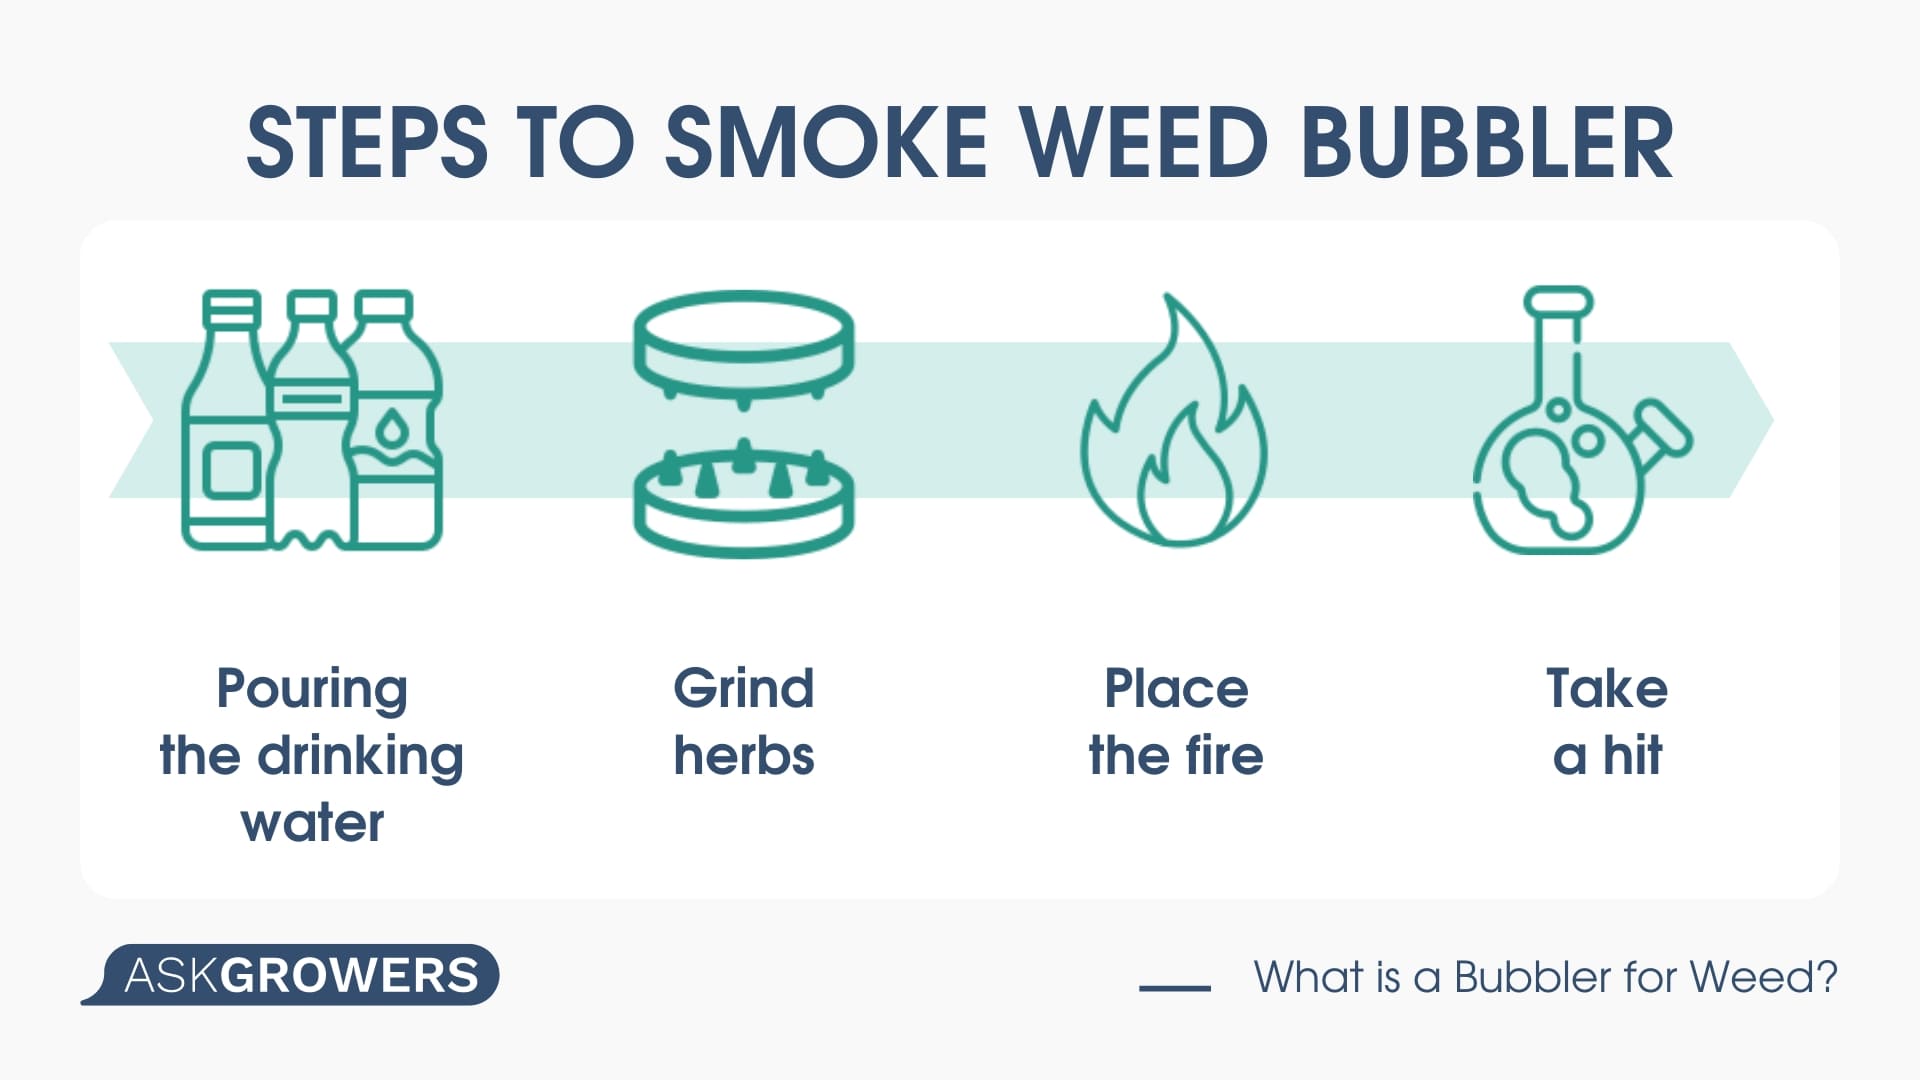 What is a weed bubbler?